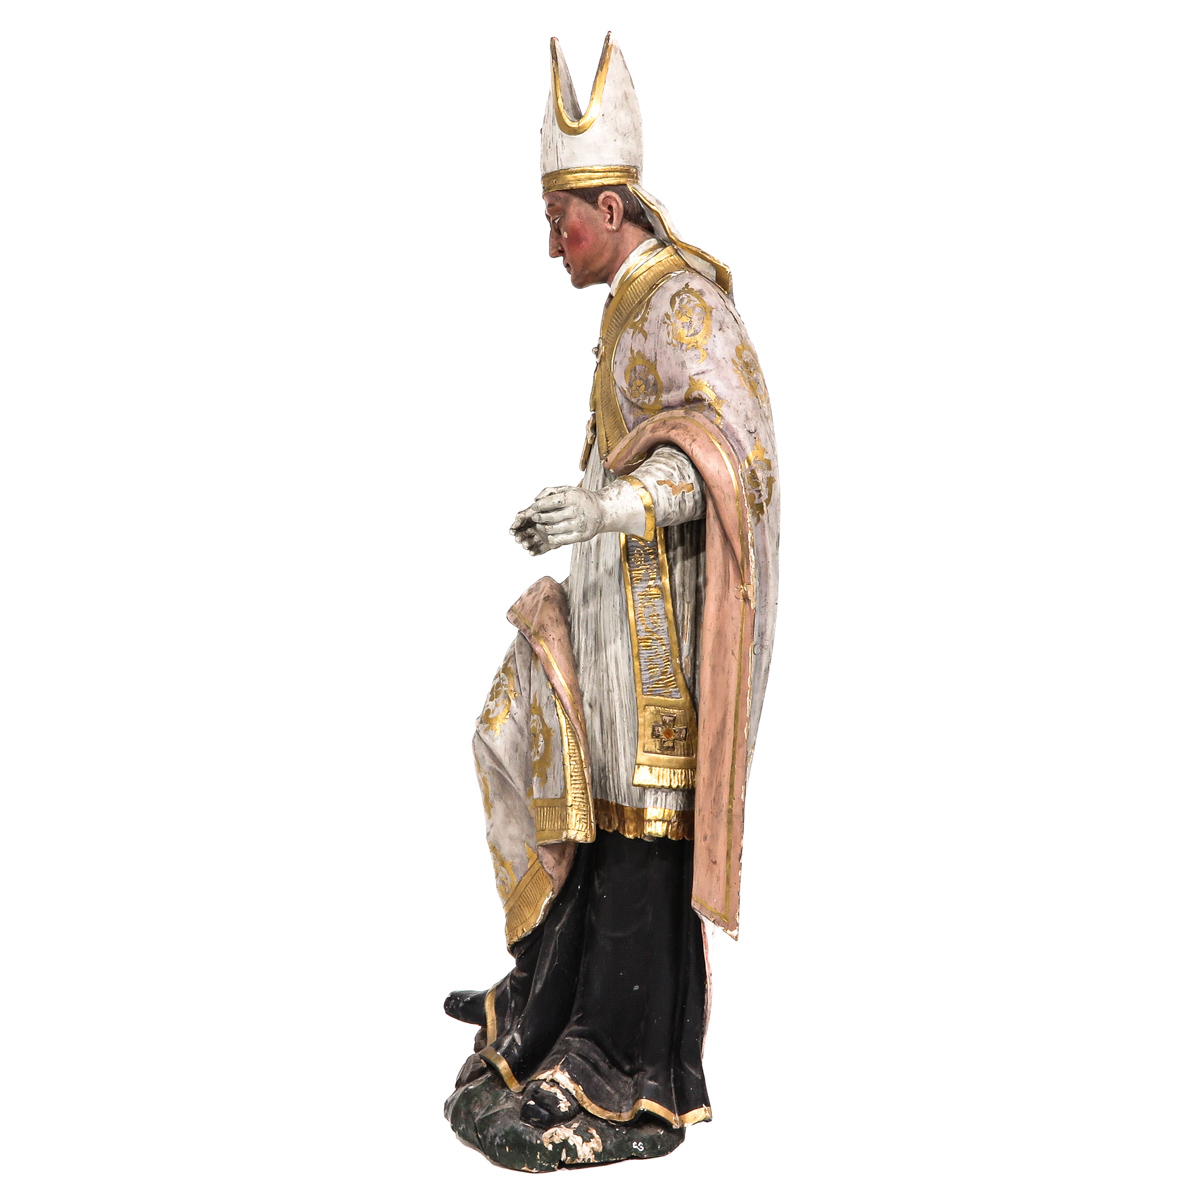 A Religious Wood Sculpture of a Pope - Image 2 of 10